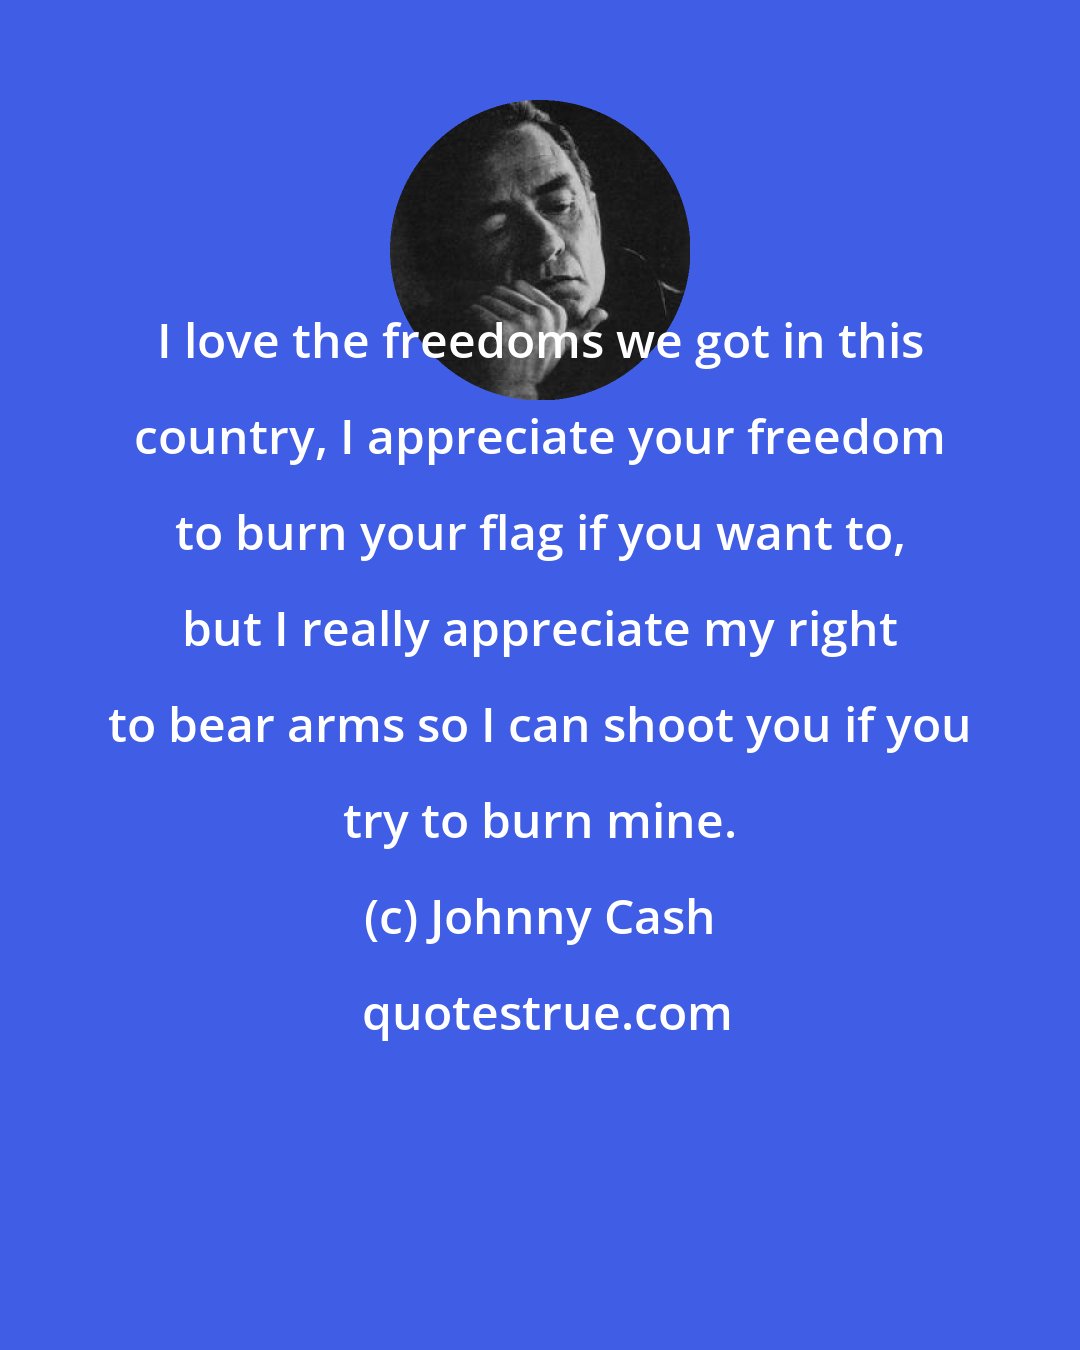 Johnny Cash: I love the freedoms we got in this country, I appreciate your freedom to burn your flag if you want to, but I really appreciate my right to bear arms so I can shoot you if you try to burn mine.